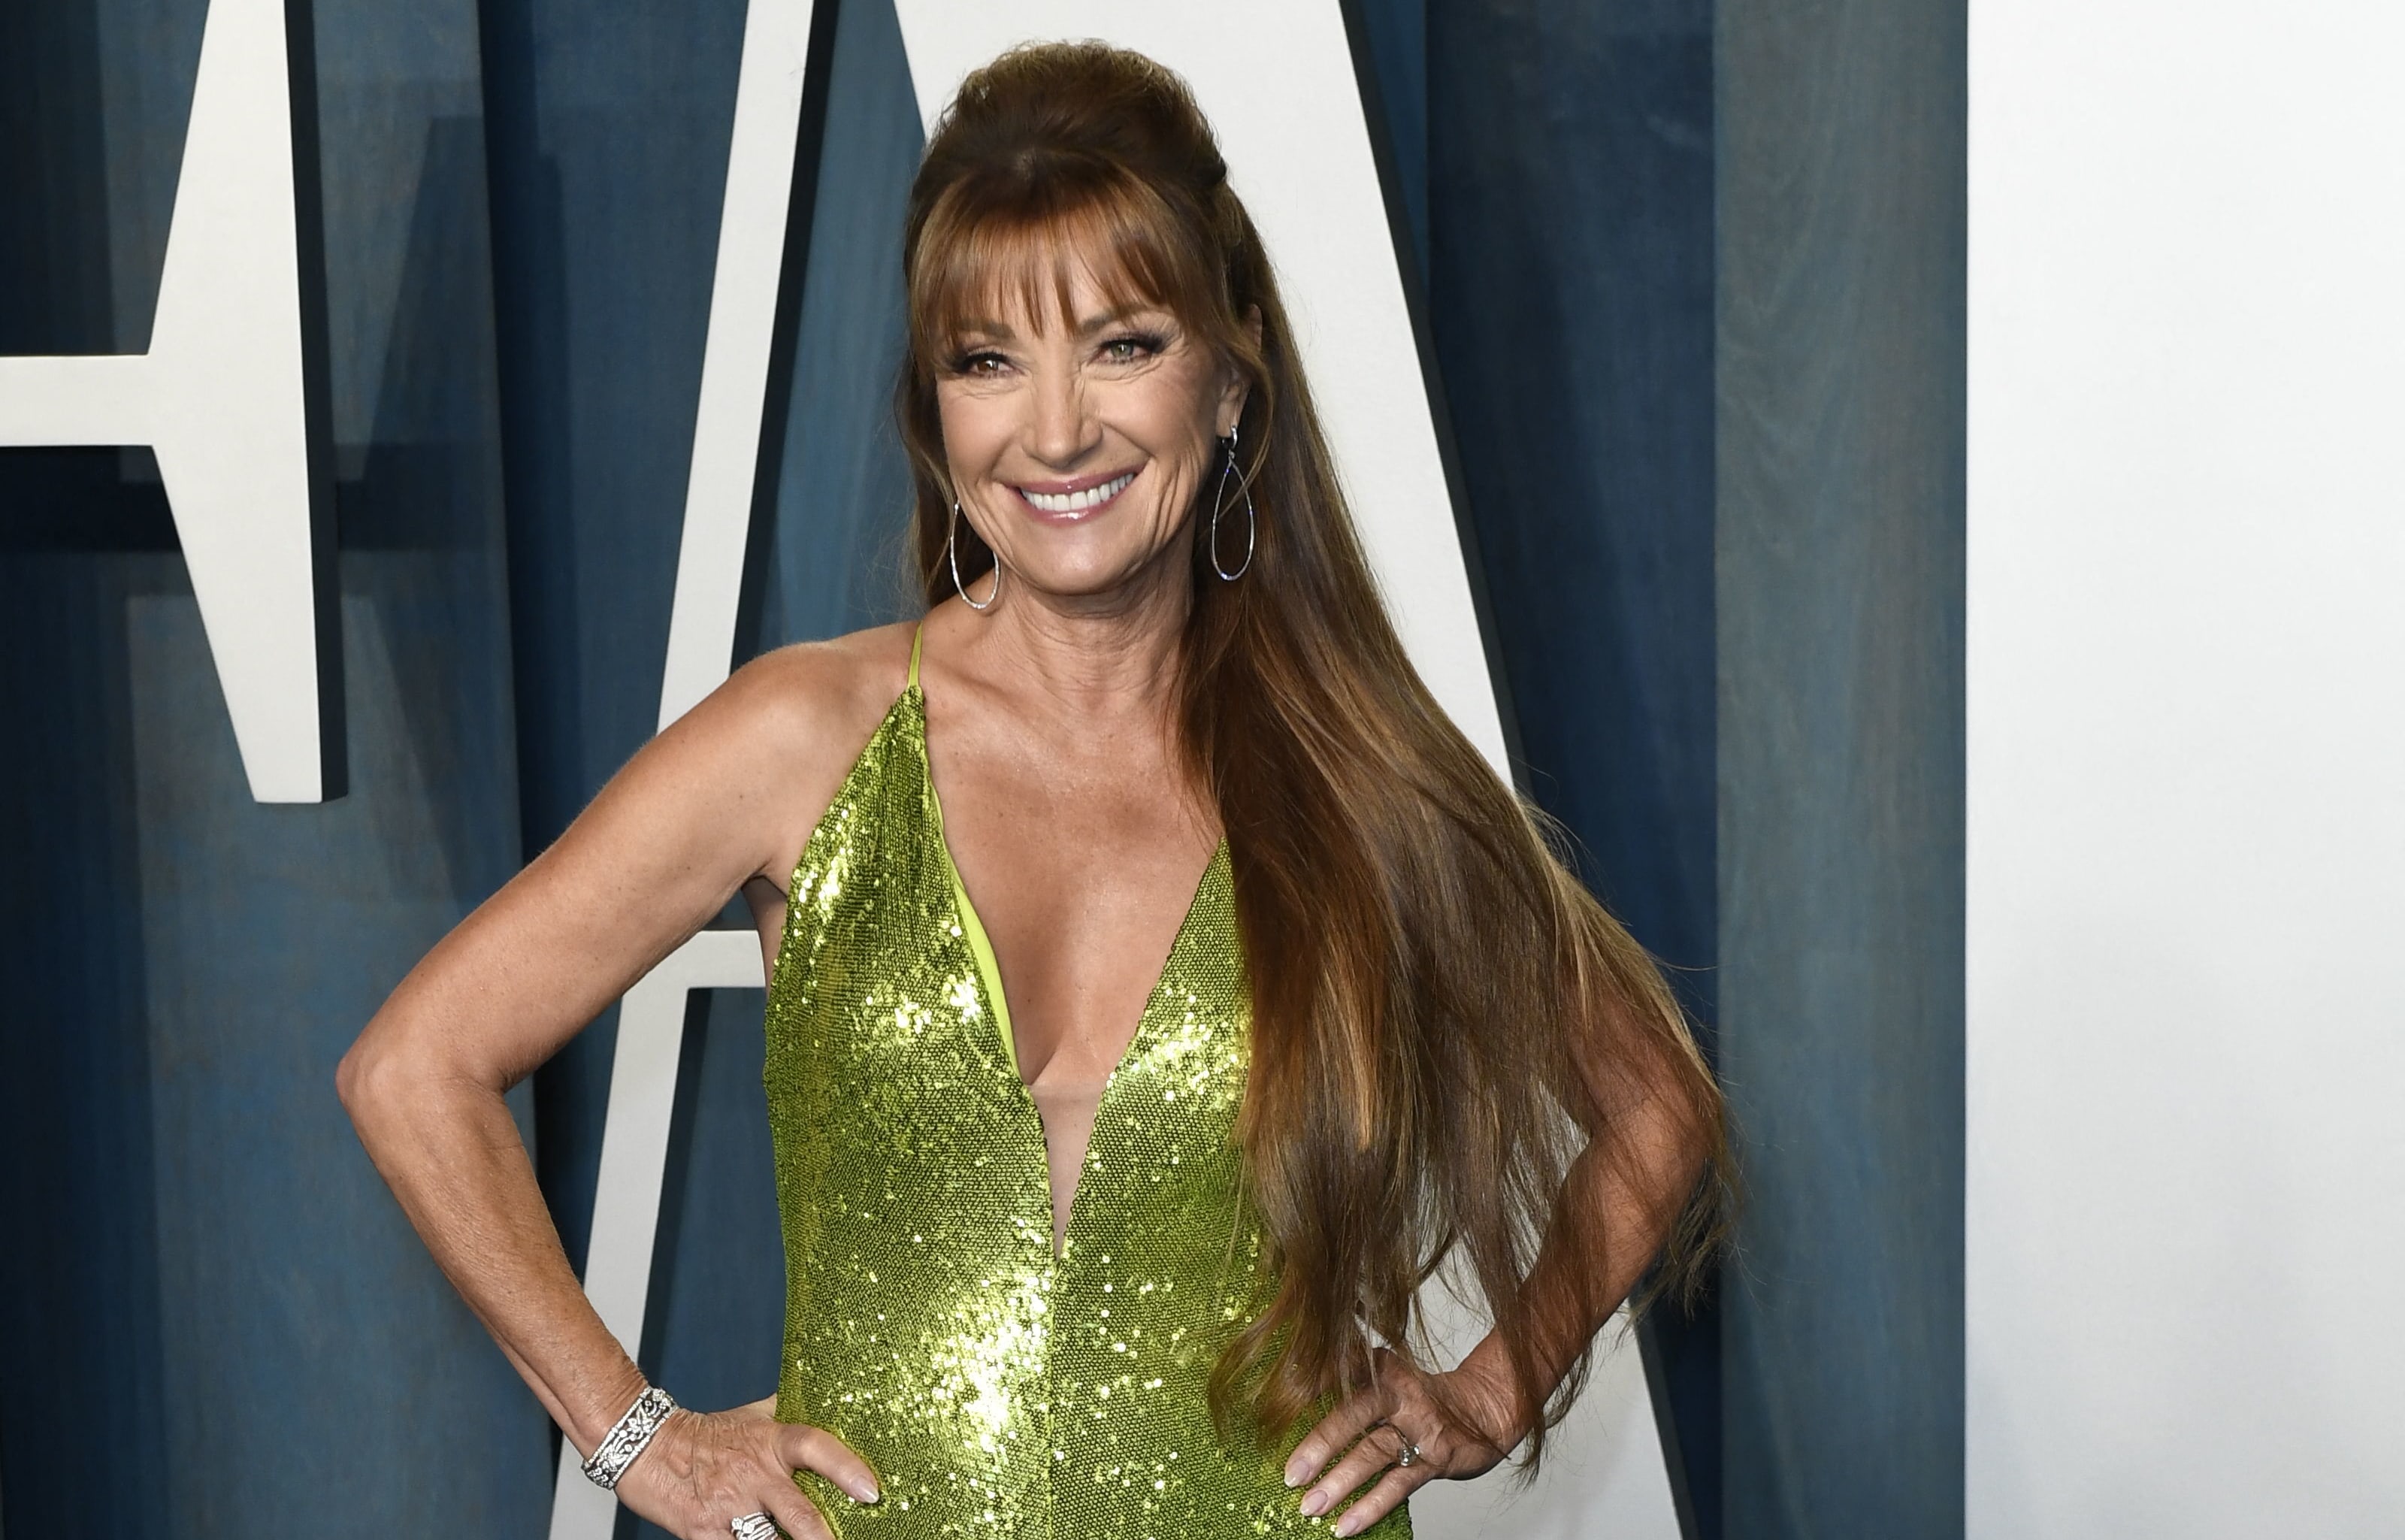 Jane Seymour attends the 2022 Vanity Fair Oscar Party following the 94th Oscars at the The Wallis Annenberg Center for the Performing Arts in Beverly Hills, California on March 27, 2022.